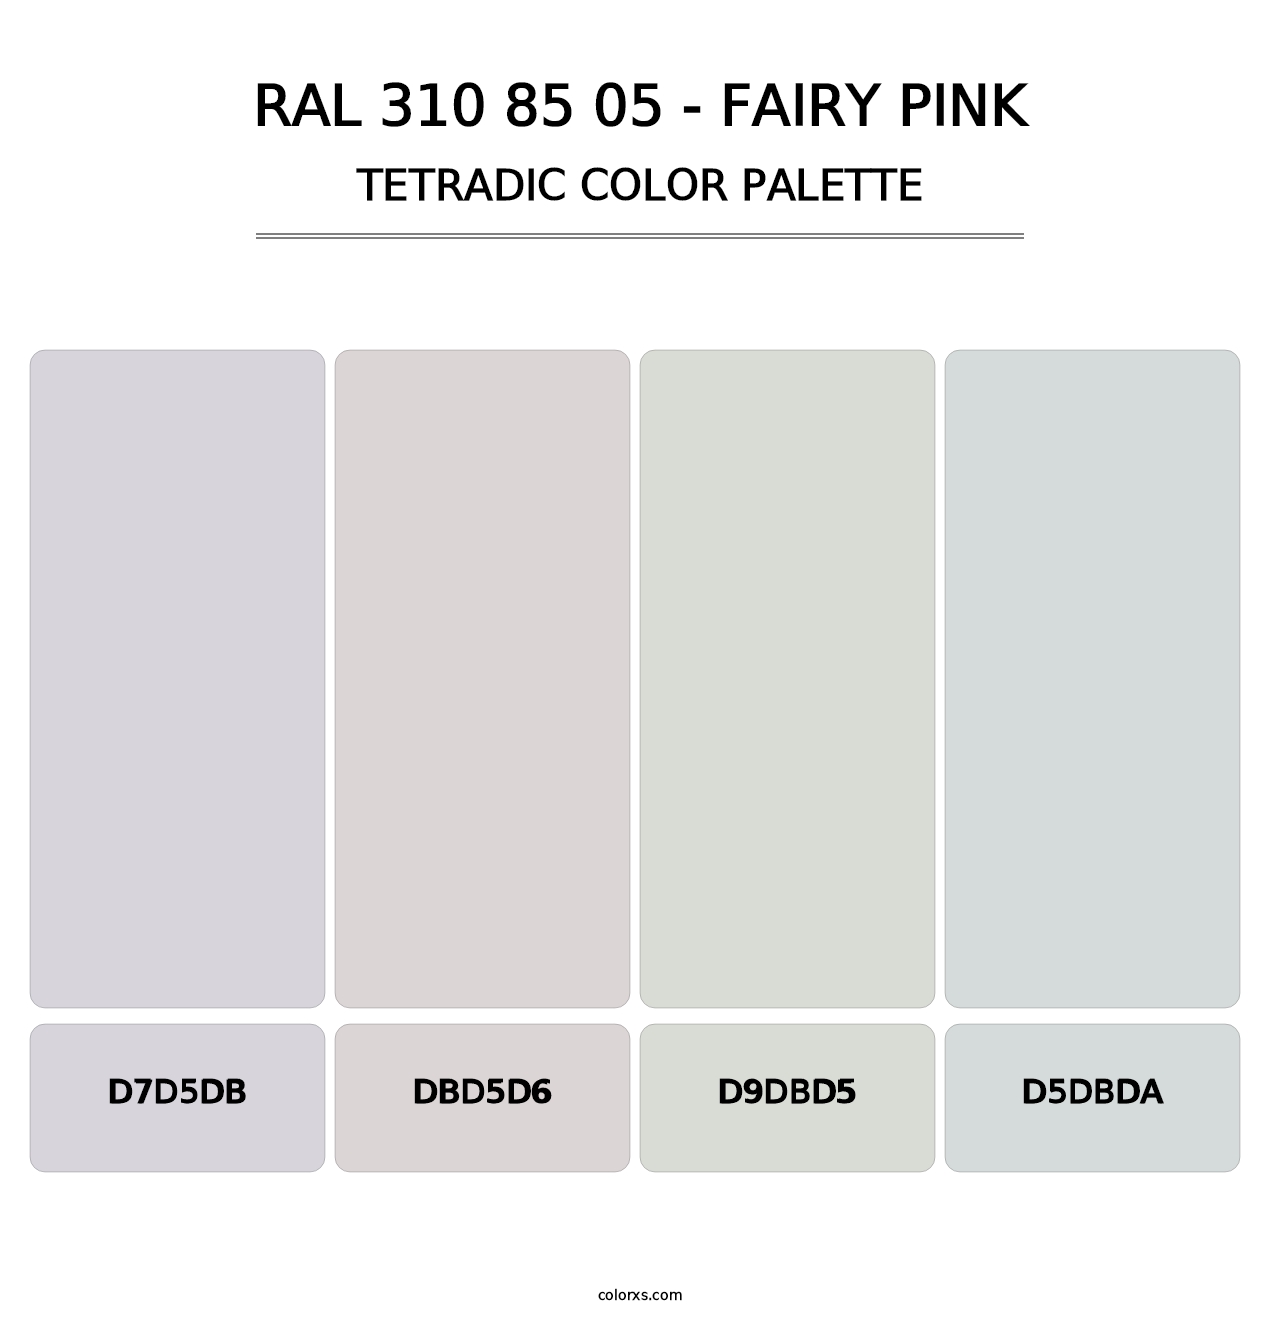 RAL 310 85 05 - Fairy Pink - Tetradic Color Palette